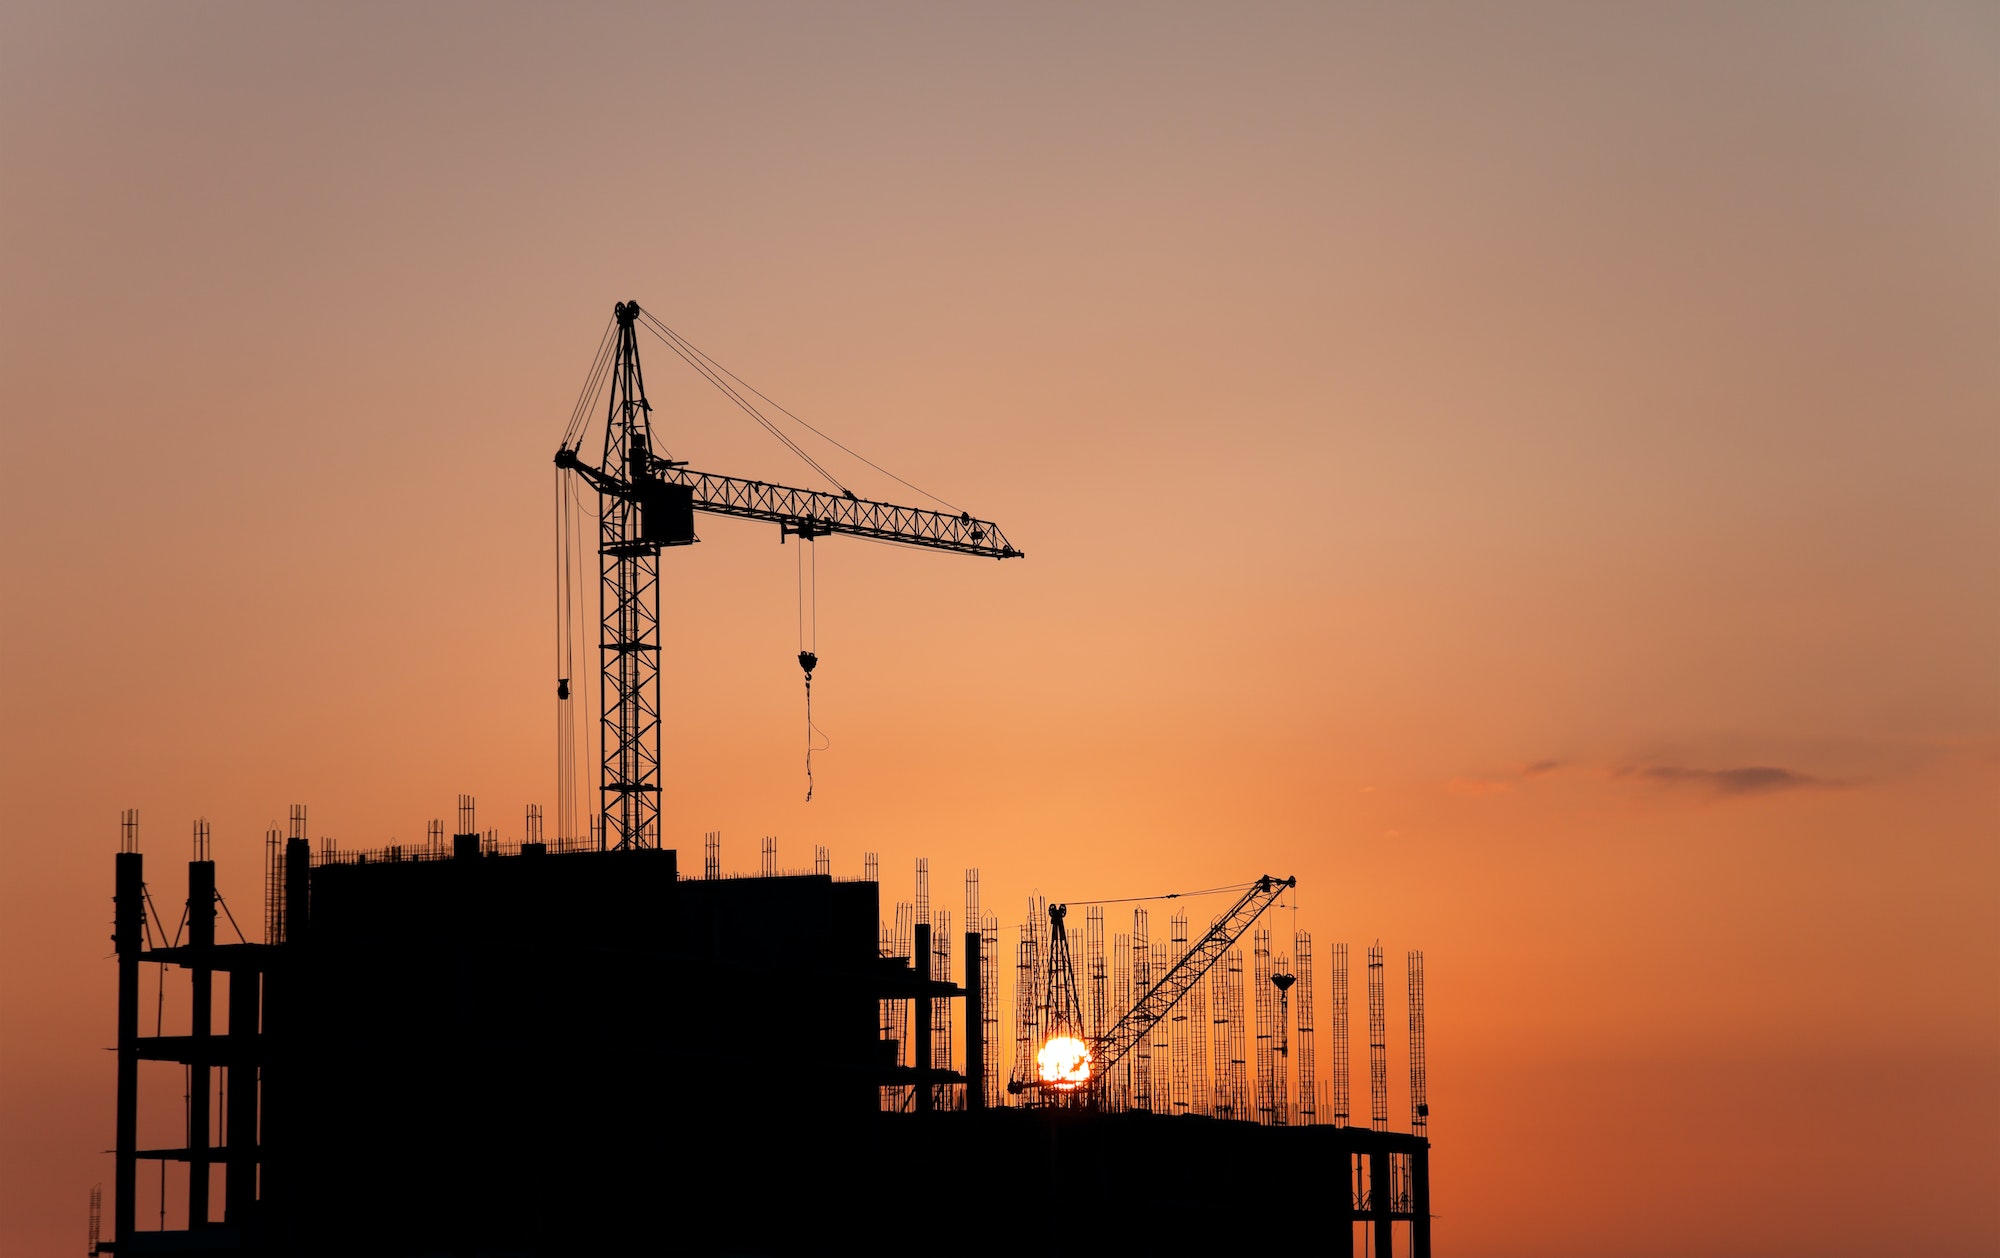 Construction cranes and concrete structure at sunset